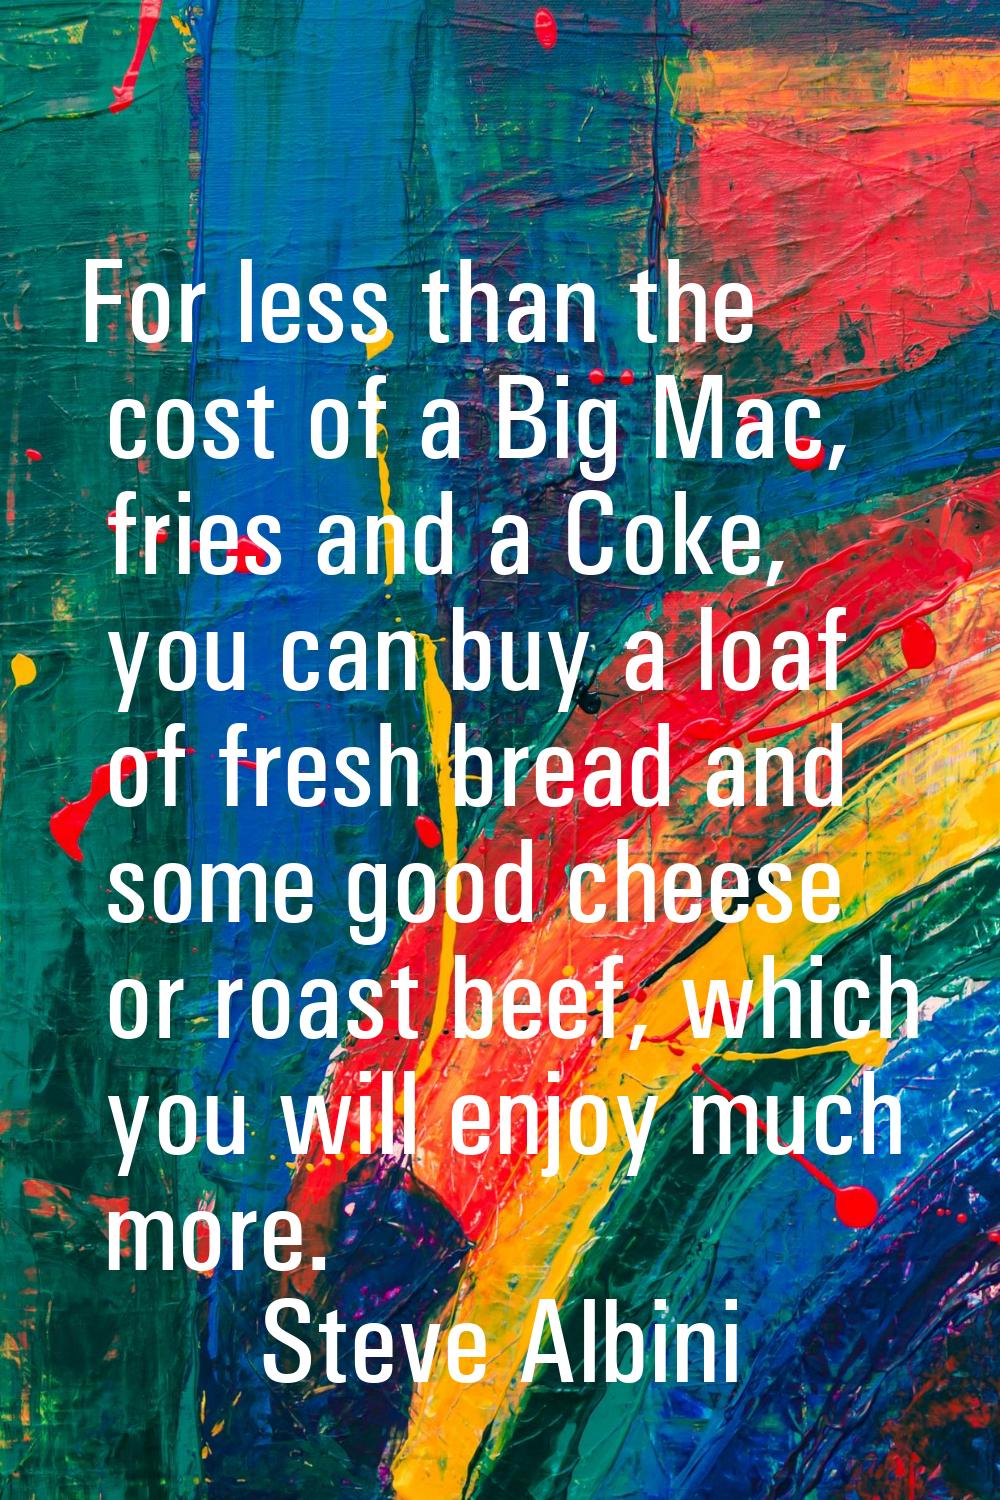 For less than the cost of a Big Mac, fries and a Coke, you can buy a loaf of fresh bread and some g